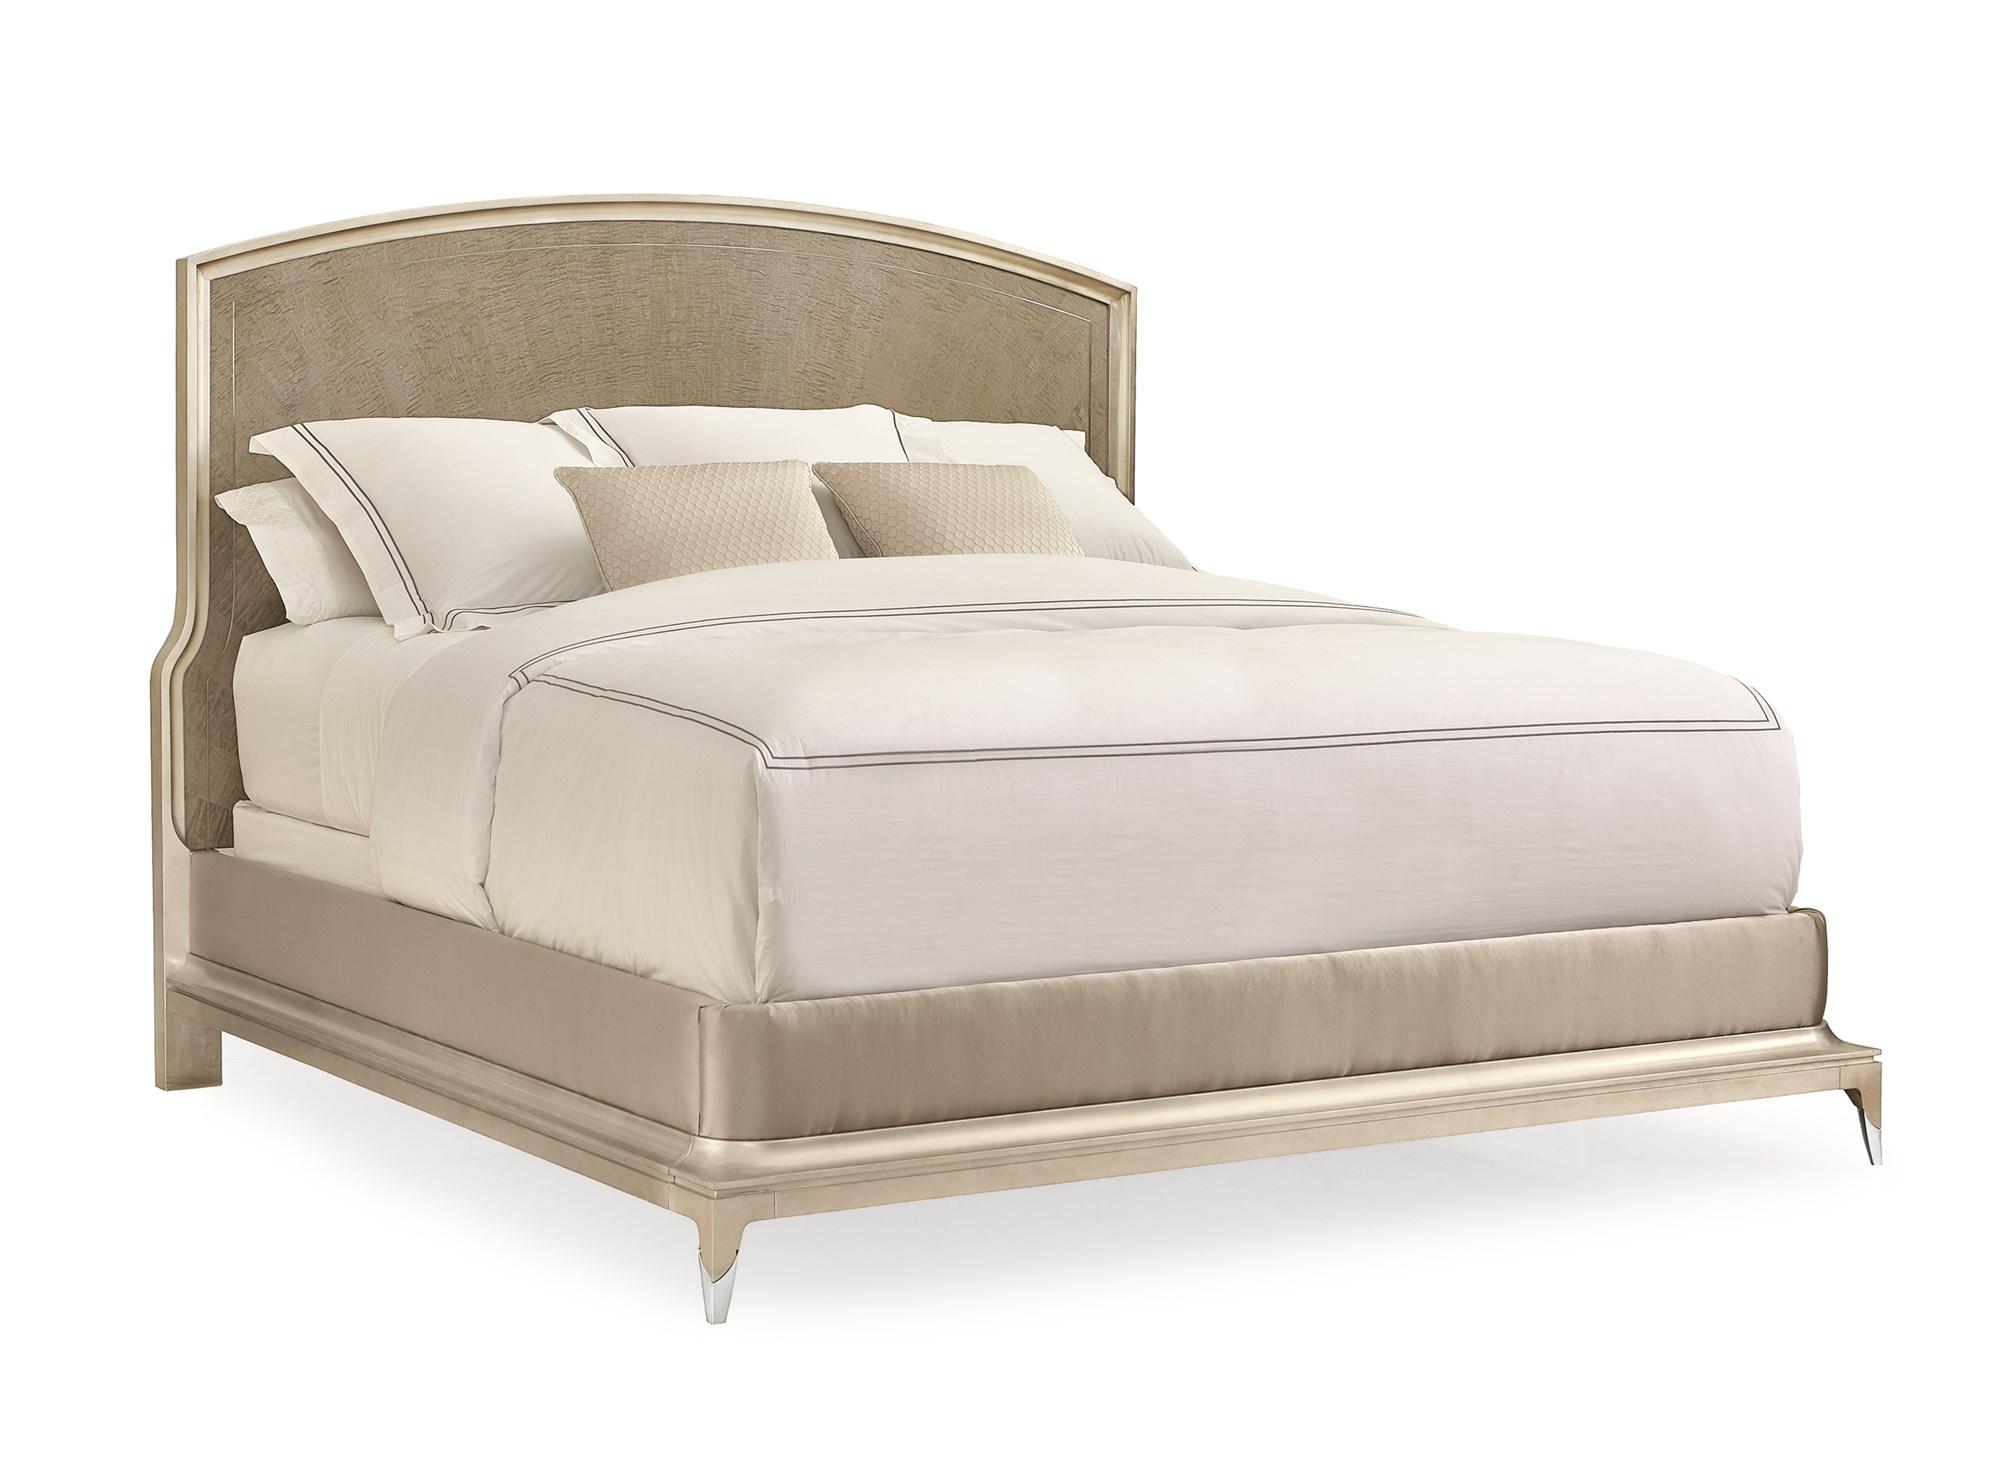 Contemporary Platform Bed RISE TO THE OCCASION CLA-417-105 in Silver, Beige 